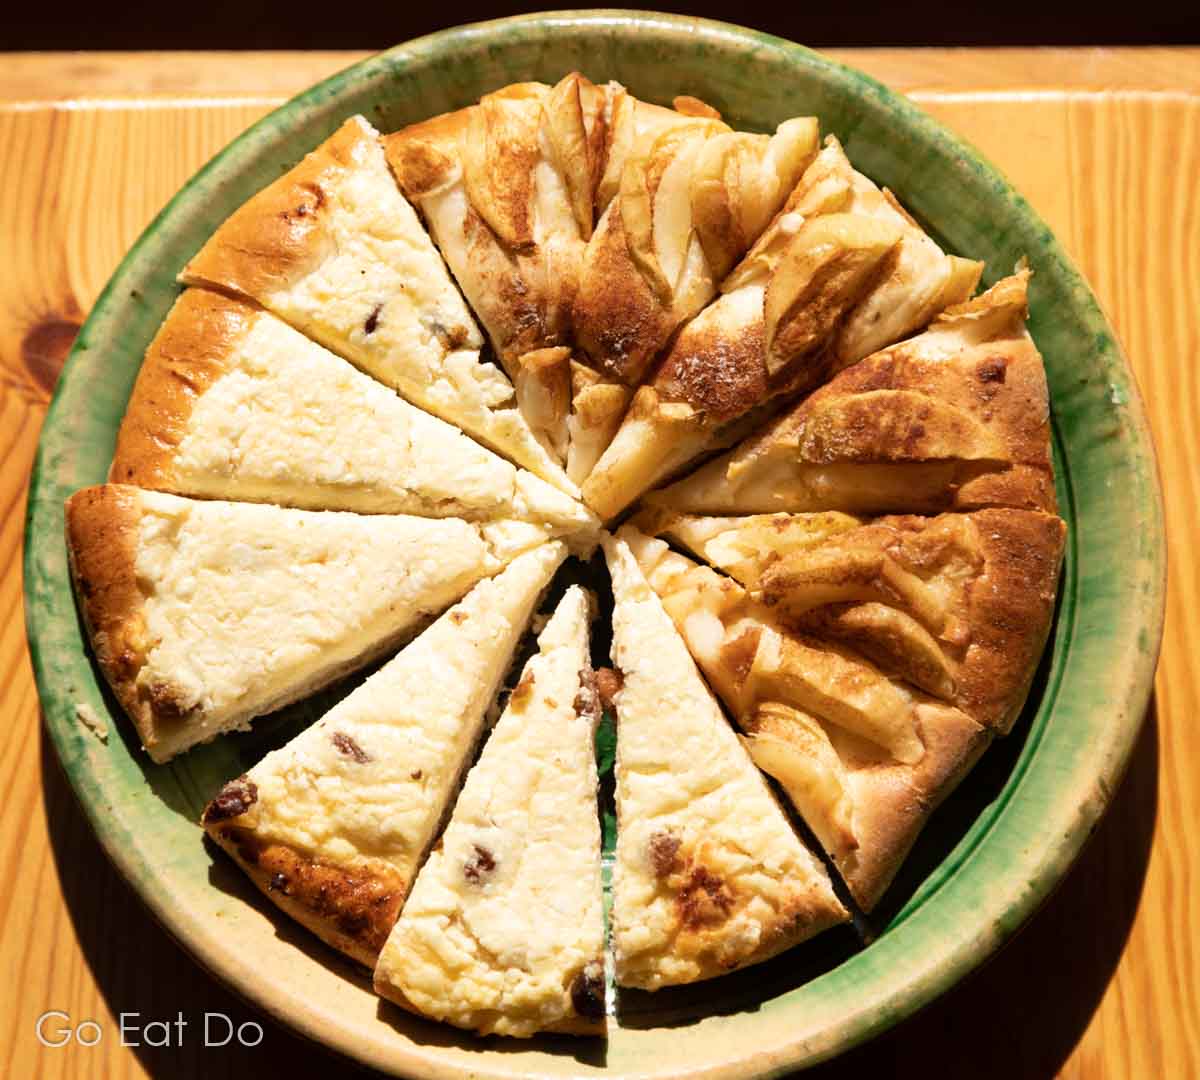 Slices of pie on a plate at the Bread Museum at Aglona in Latvia.